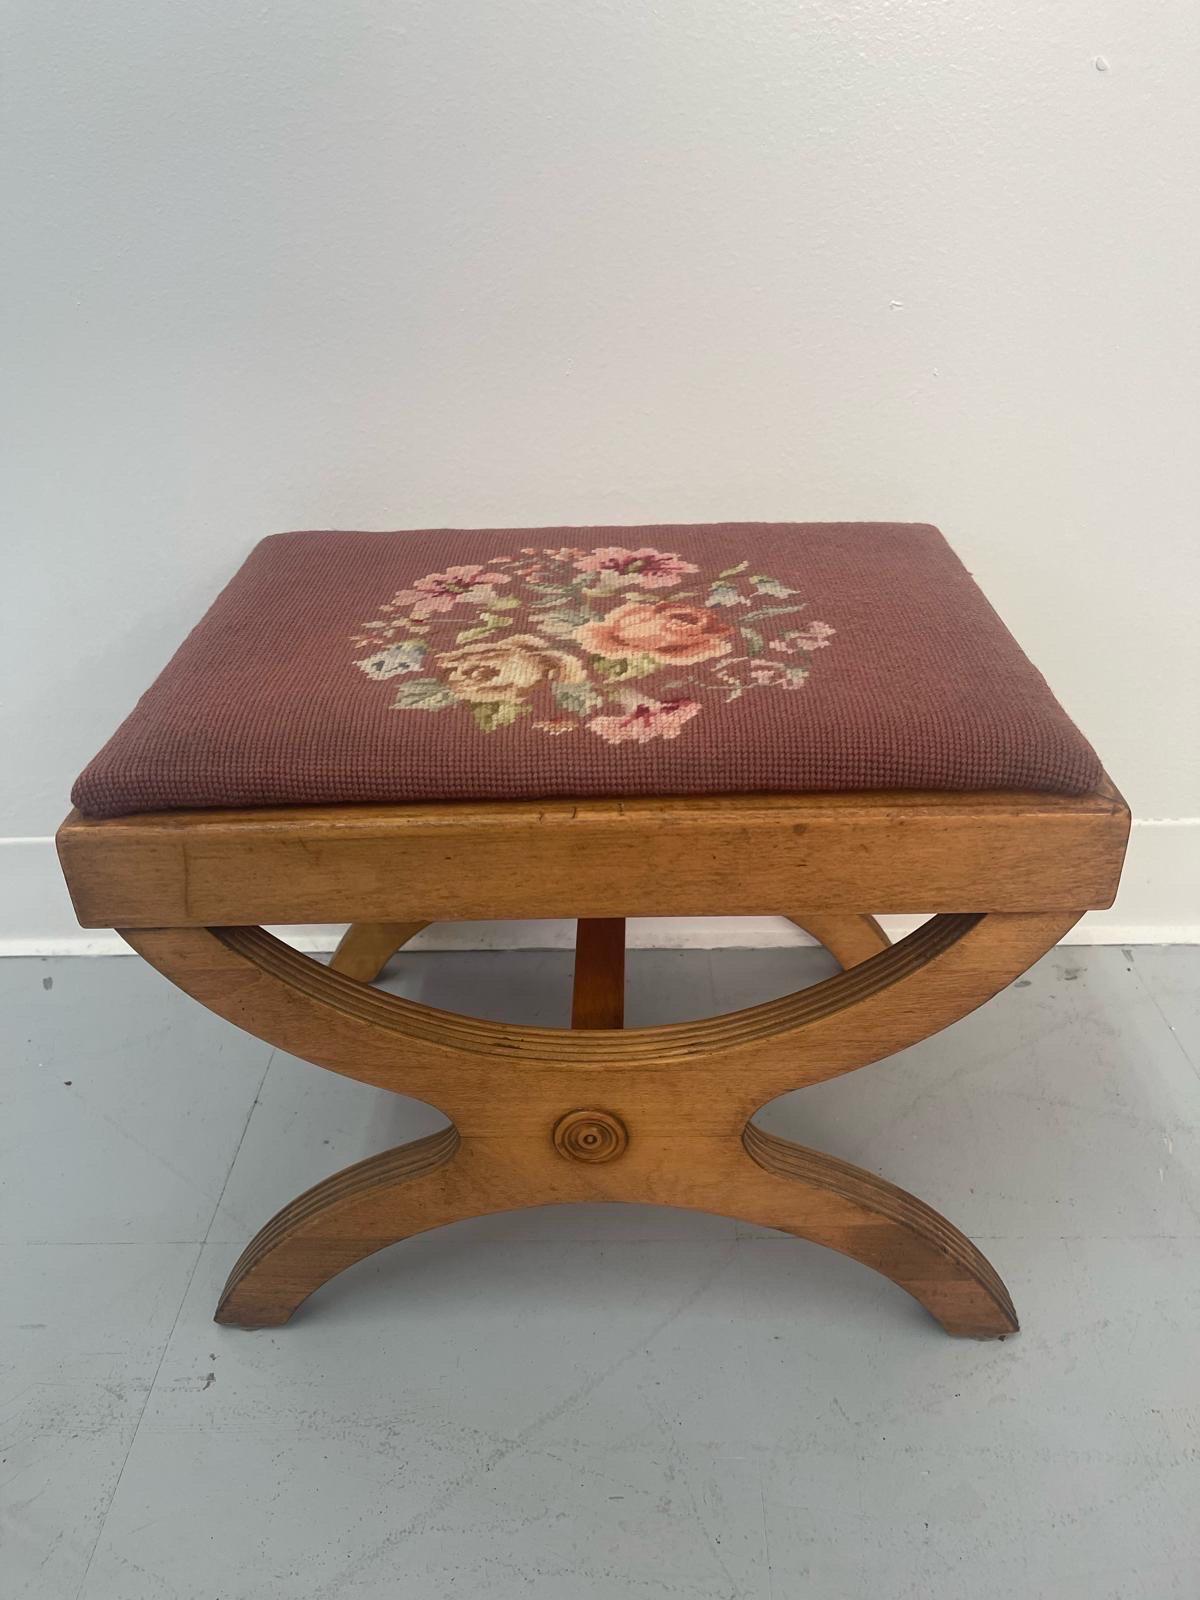 Late 20th Century Vintage Needlepoint Embroidery Footstool With Floral Motif For Sale